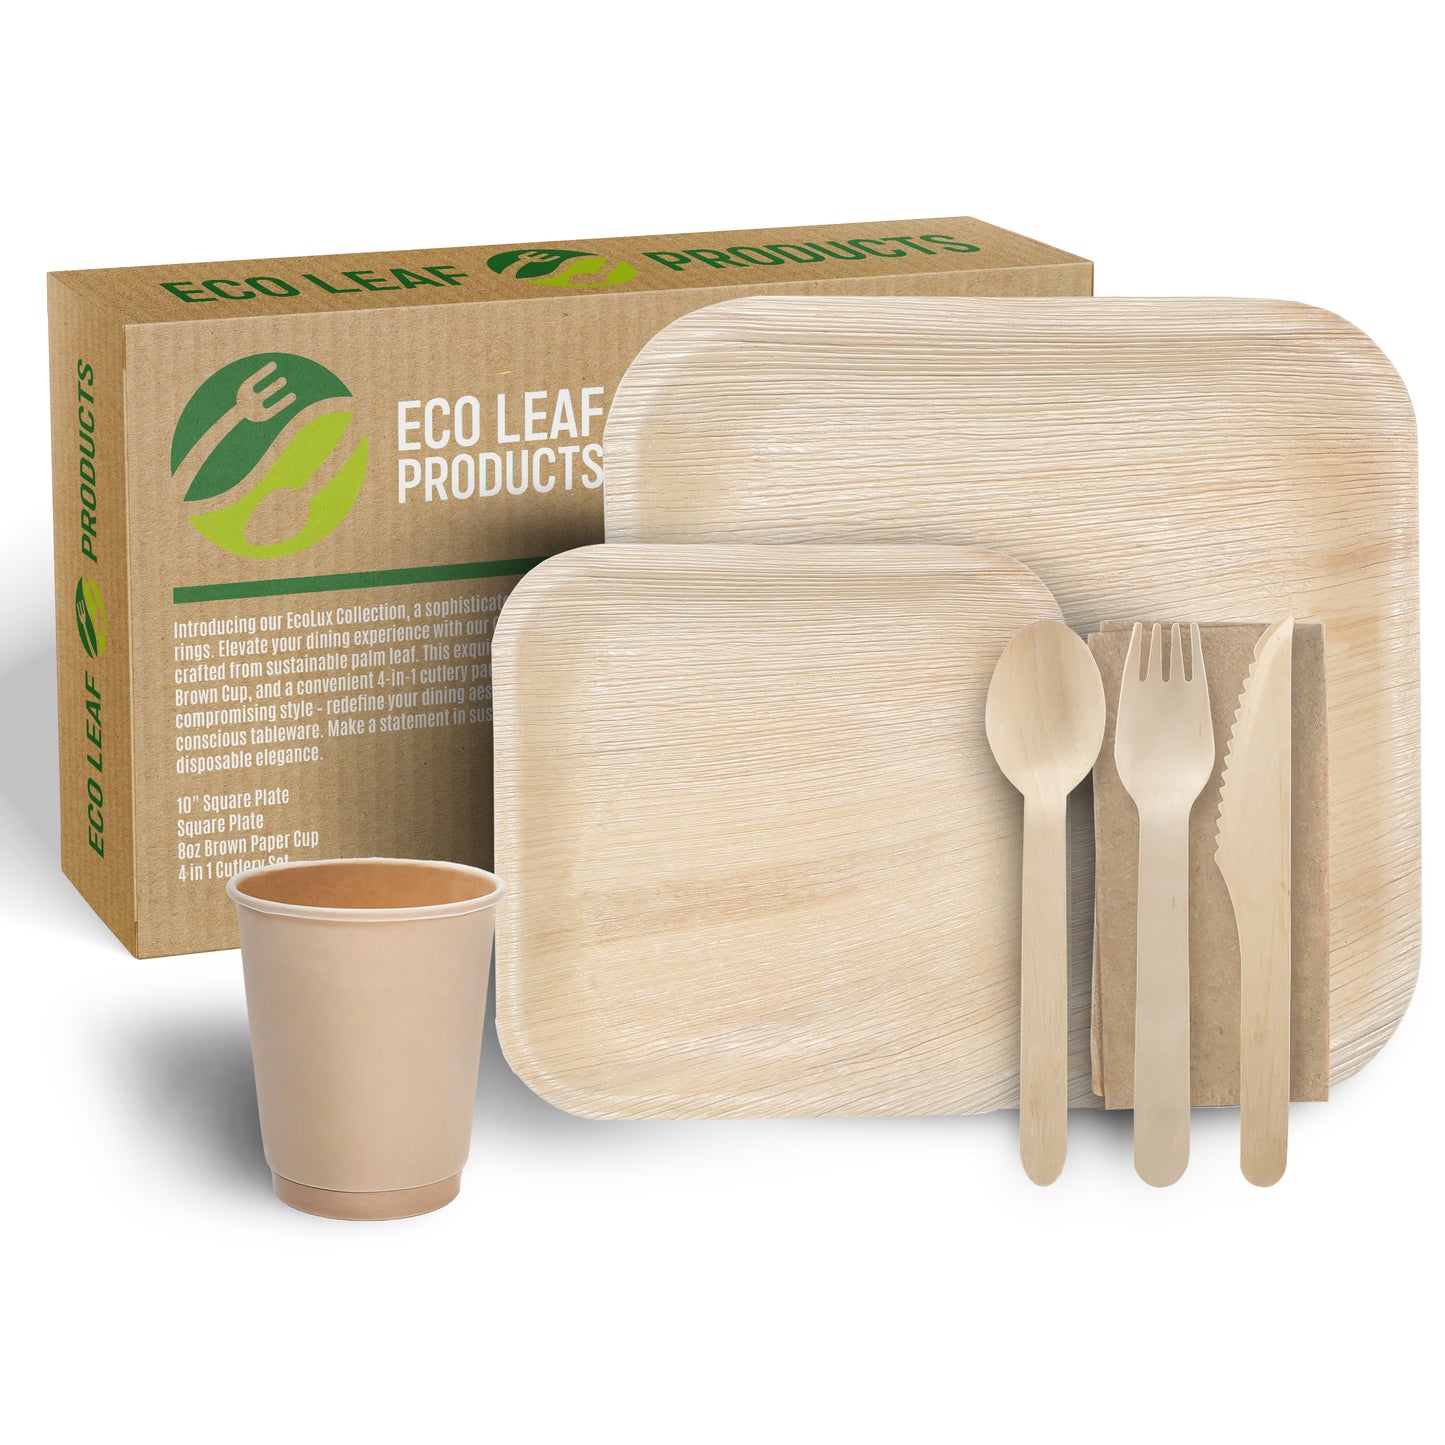 Disposable Party Supplies Bundle - Palm Leaf Plates & Trays - Eco Leaf Products